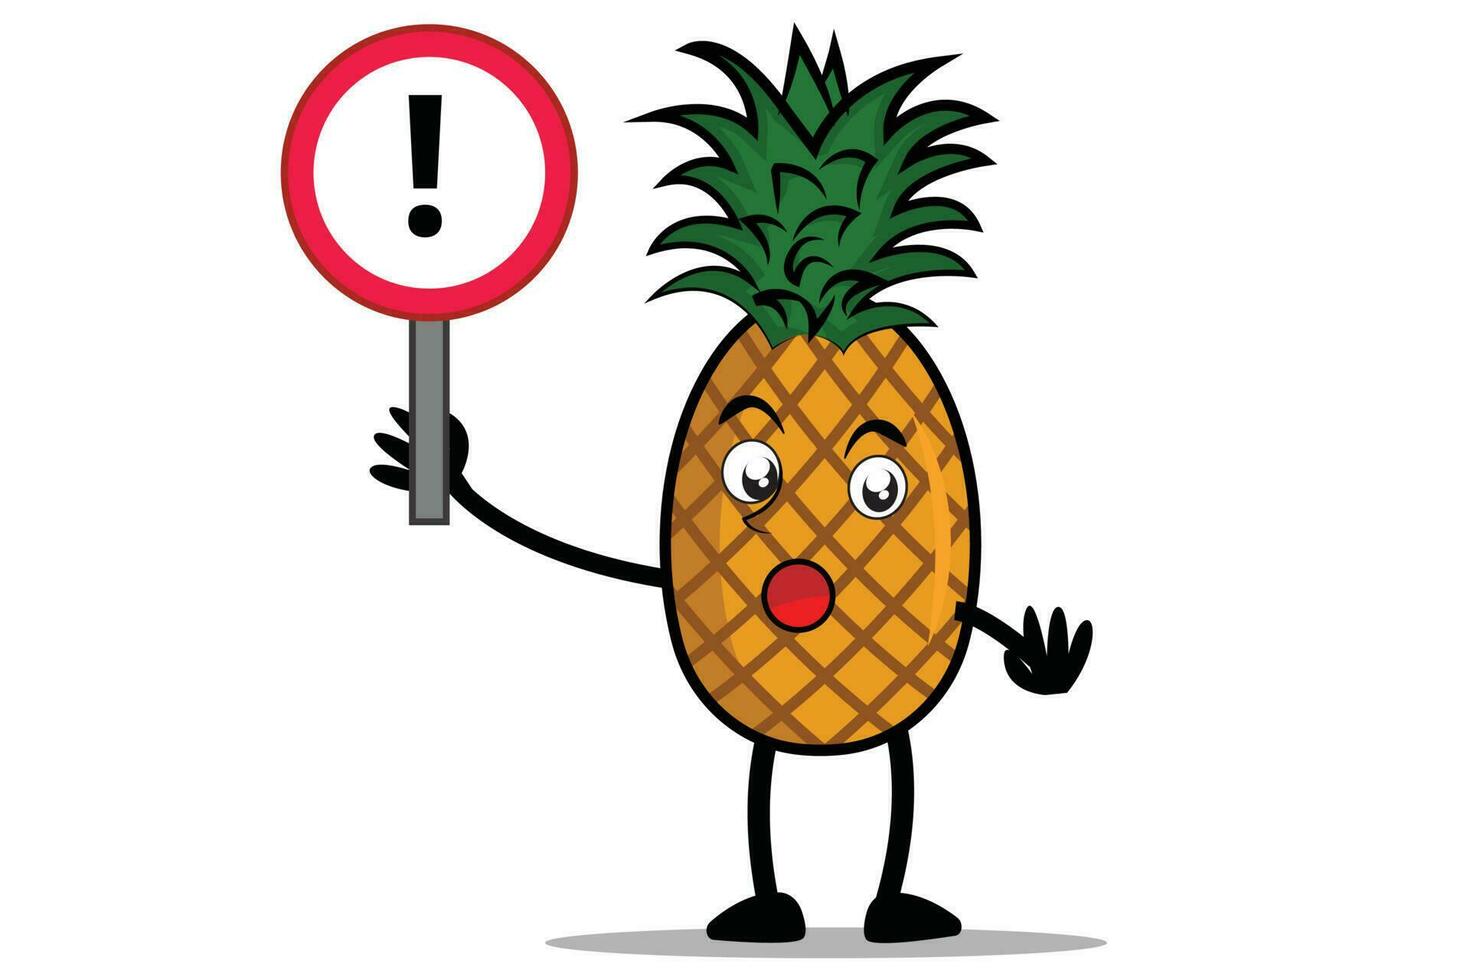 Pineapple Cartoon mascot or character holding a sign of attention vector